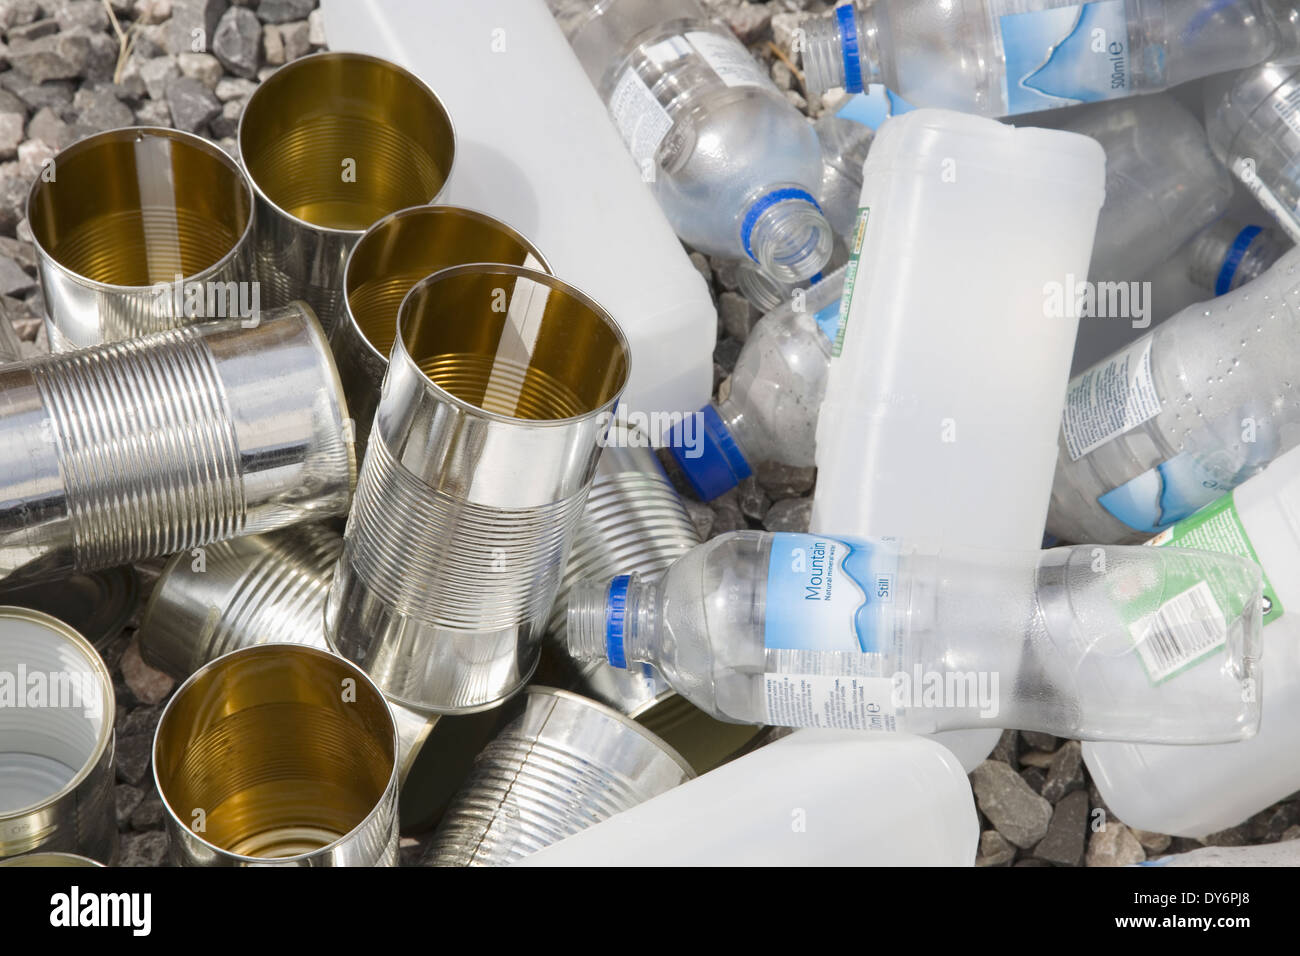 plastic bottles and cans for recycling Stock Photo